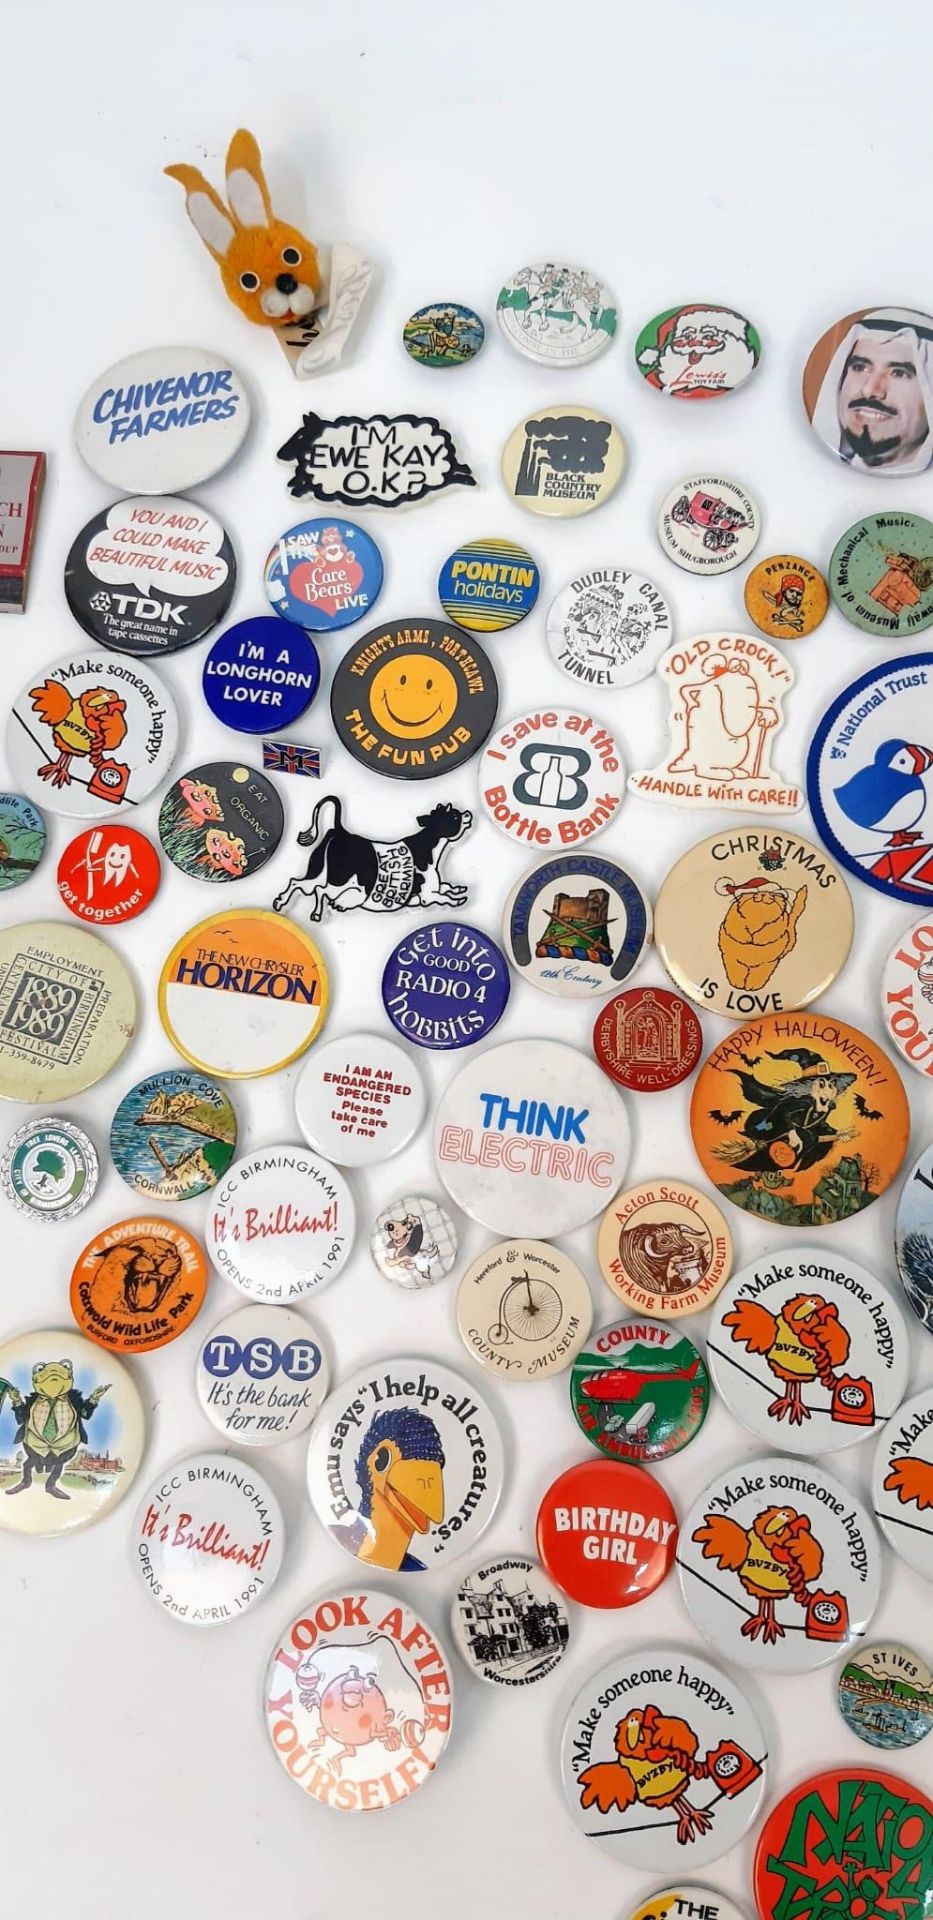 A Box of Vintage Pin Badges - Some absolute classics! - Image 8 of 8